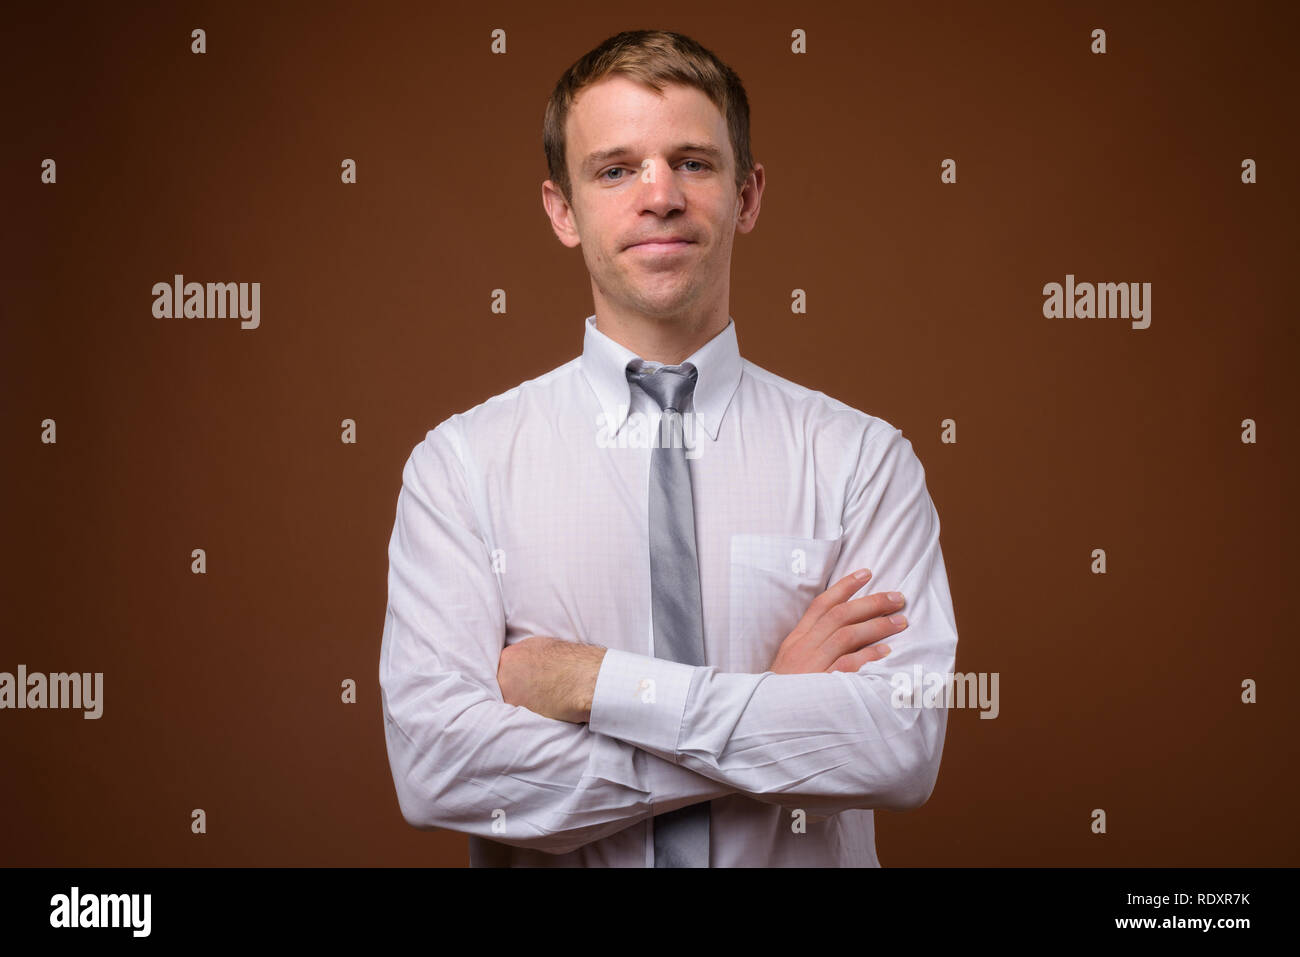 Businessman wearing white shirt against brown background Stock Photo